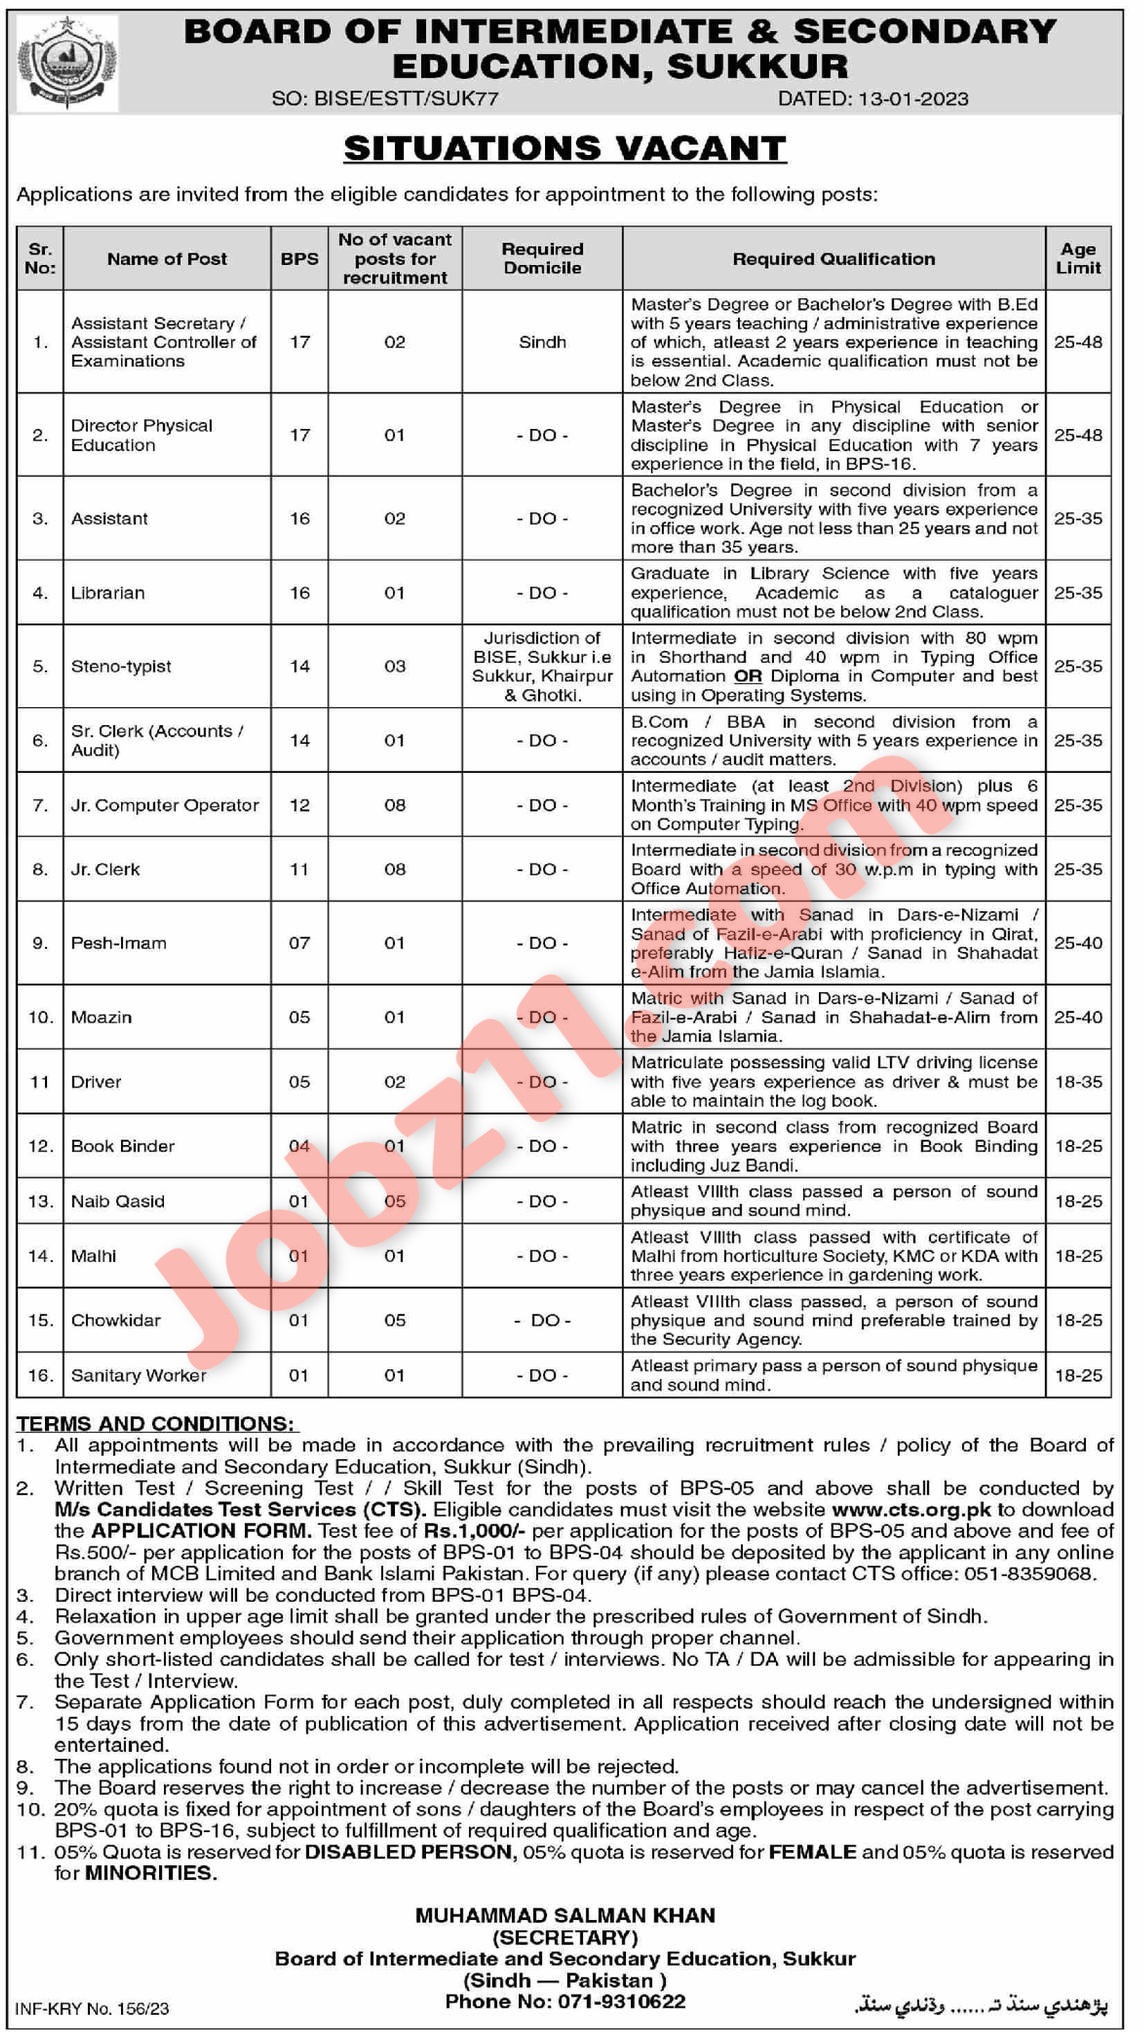 Board of Intermediate and Secondary Education BISE Sukkur Jobs 2023